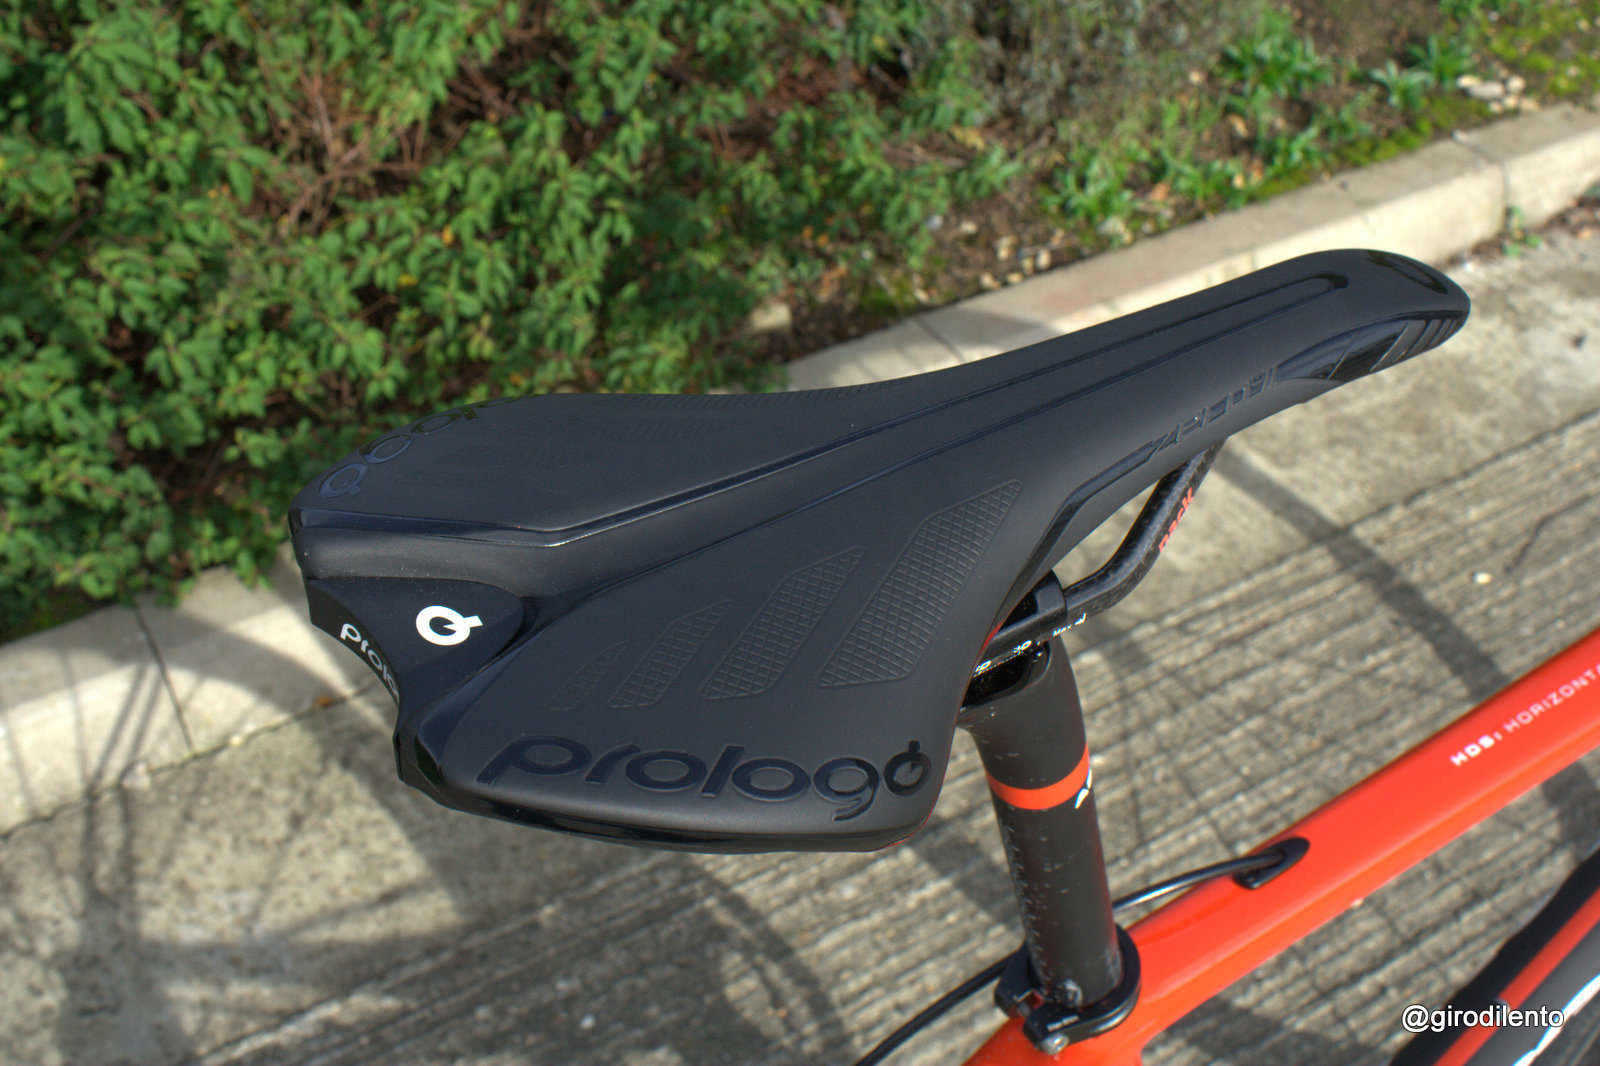 Prologo Zero flat saddle was also more comfy than expected